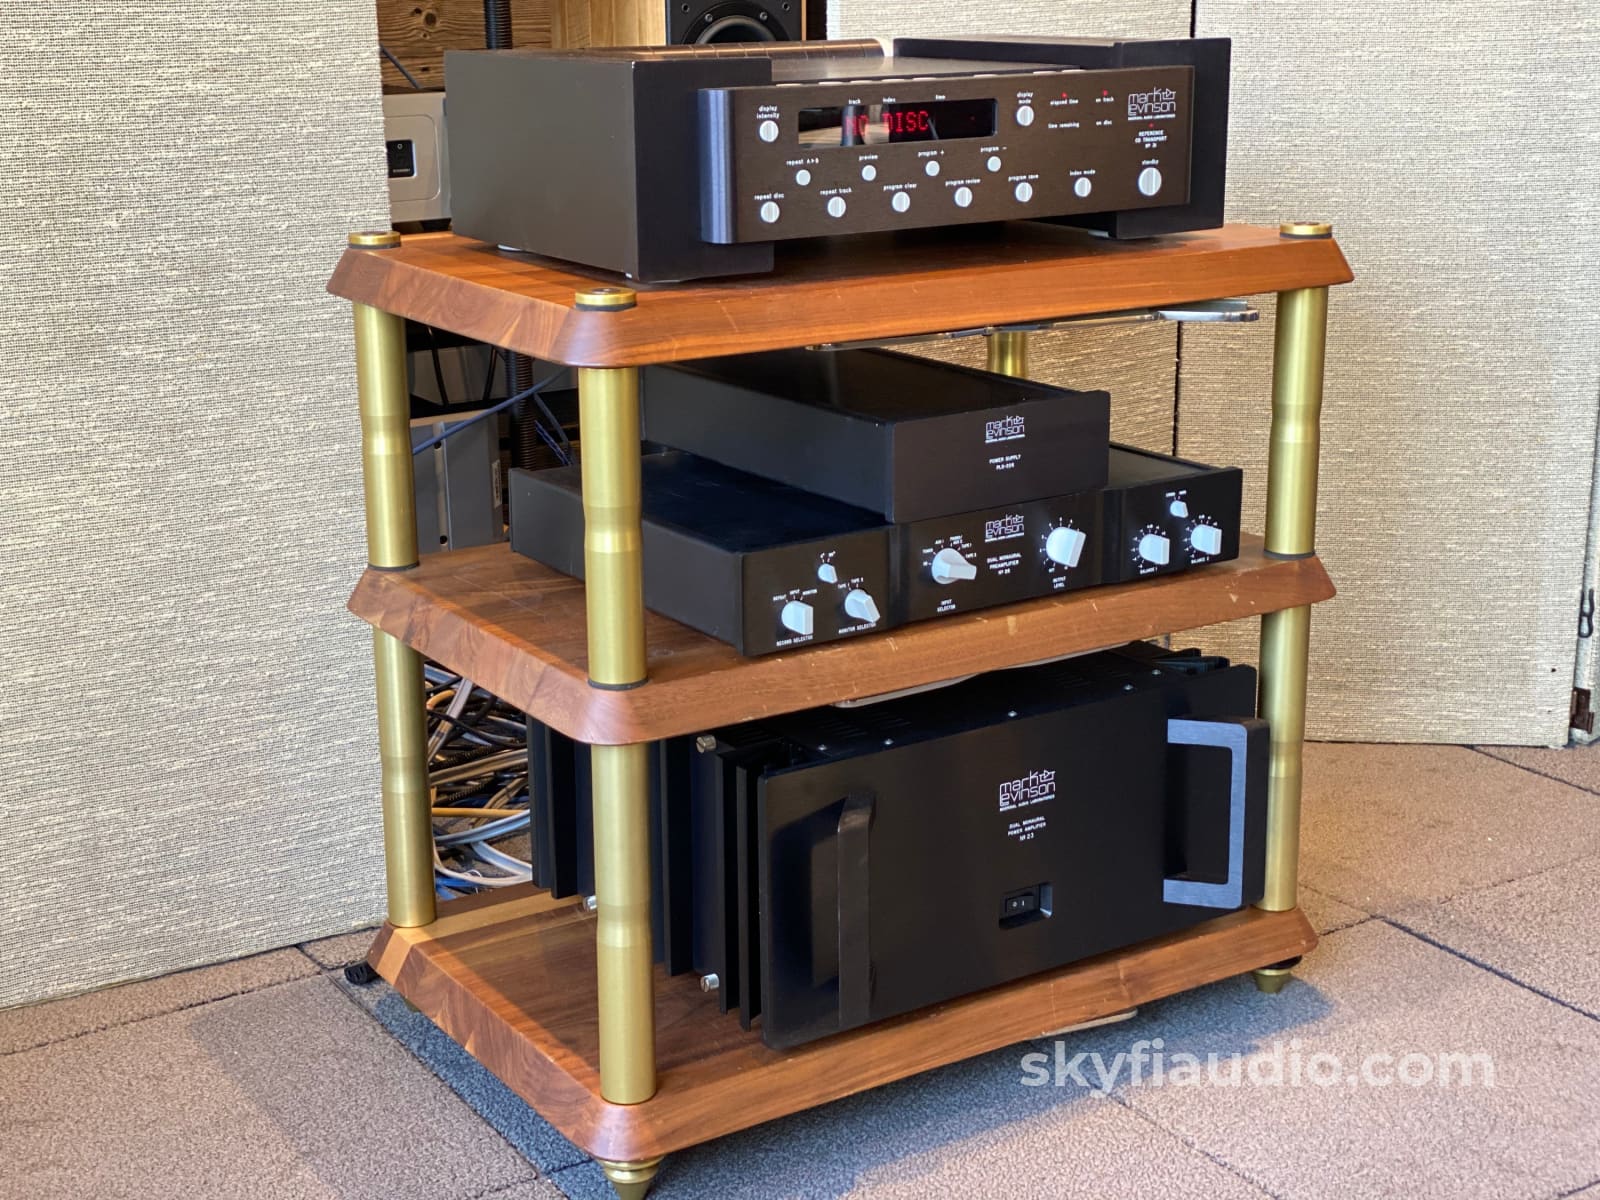 The Golden Era Of Mark Levinson - Featuring Magnepan Magneplanar Speakers